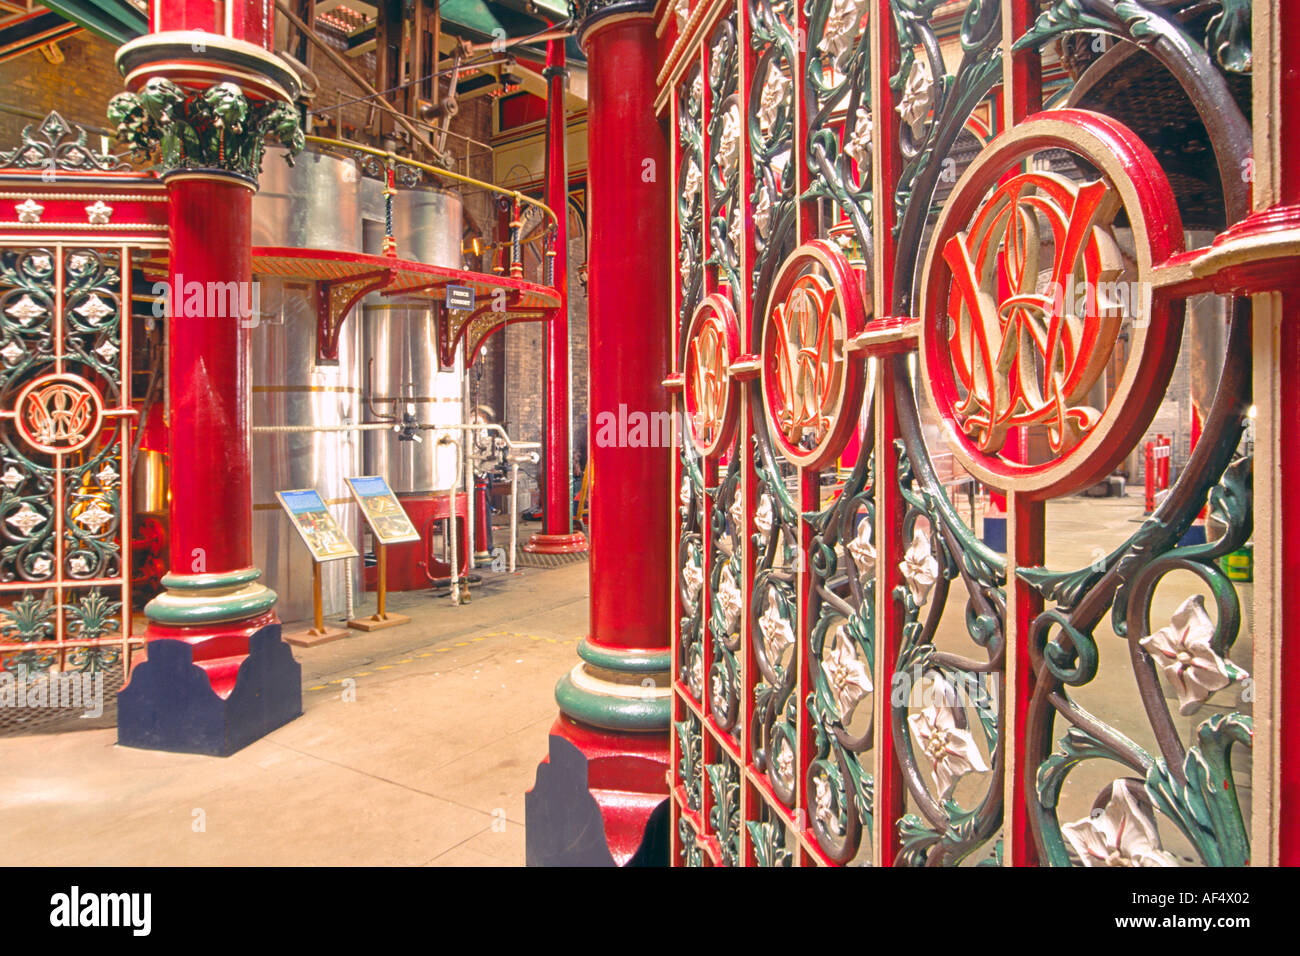 The ornate interior of the Victorian-era Crossness Pumping station in east London. It has been recently restored. Stock Photo